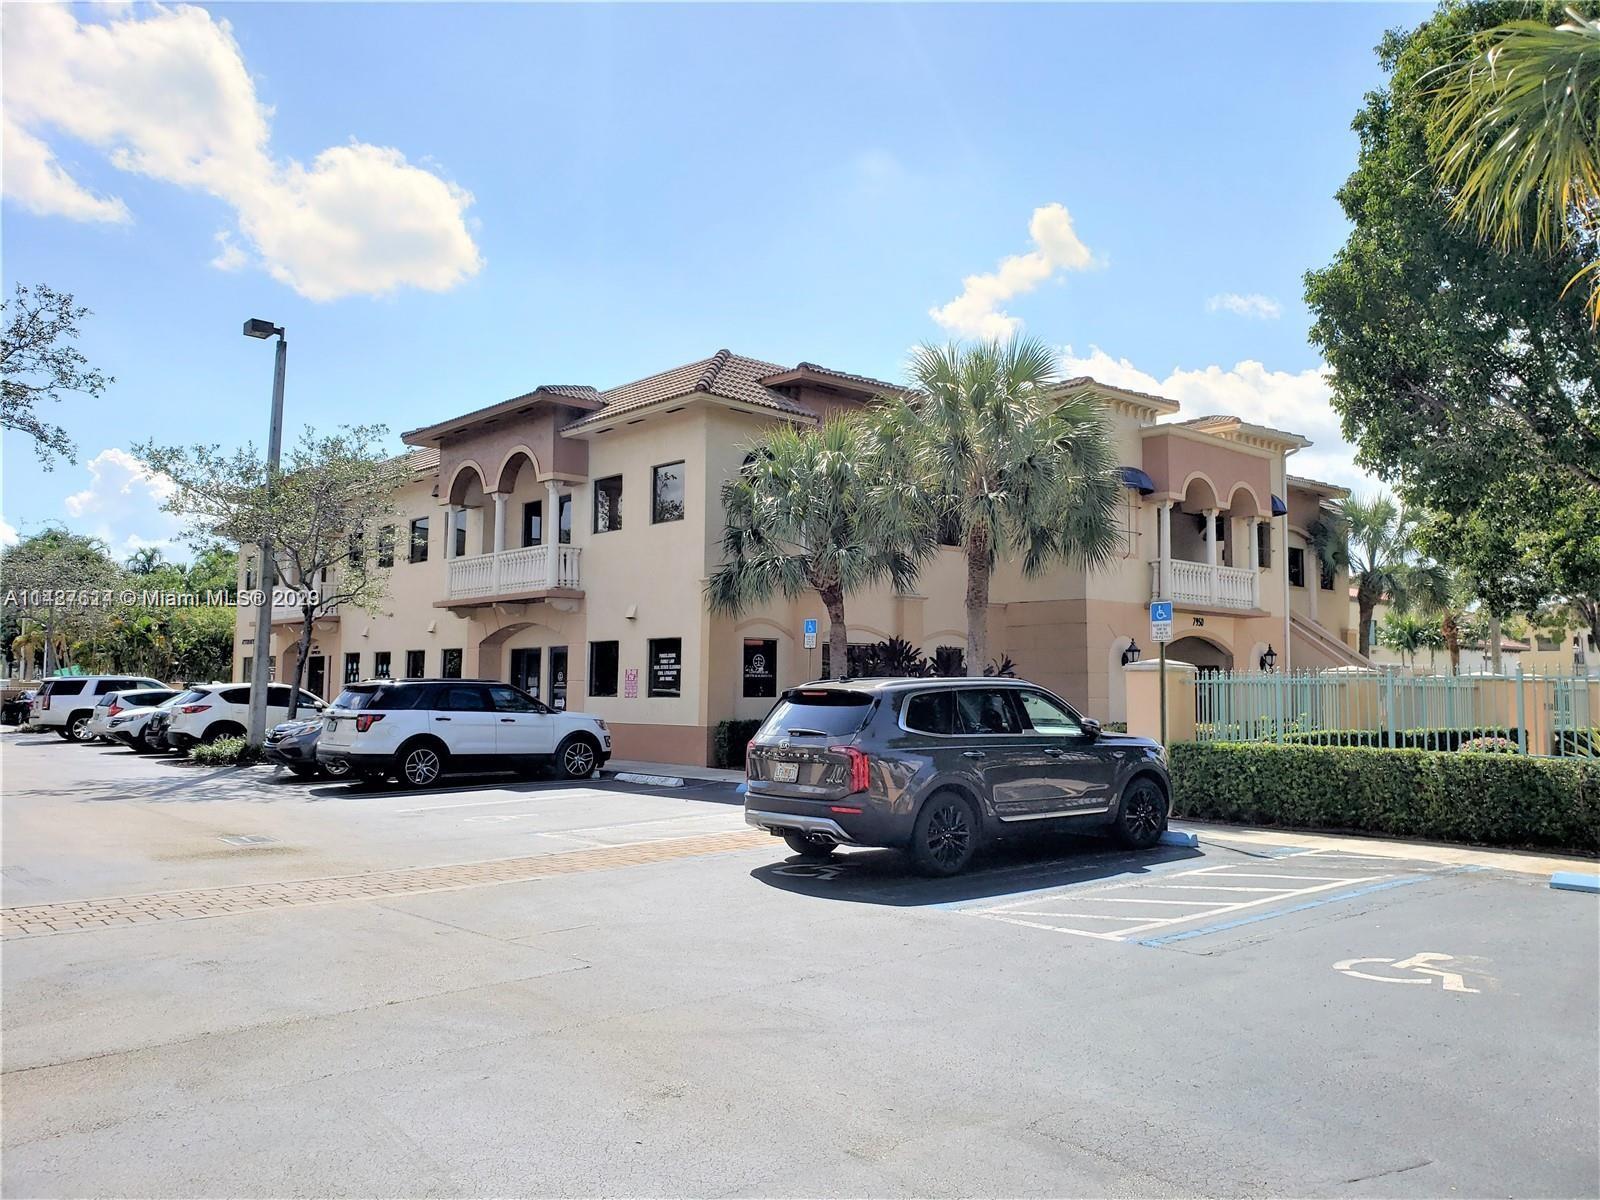 7950 NW 155th St 101, 102, 107, 108, Miami Lakes, Florida 33016, ,Commercialsale,For Sale,7950 NW 155th St 101,102,107,108,A11427614